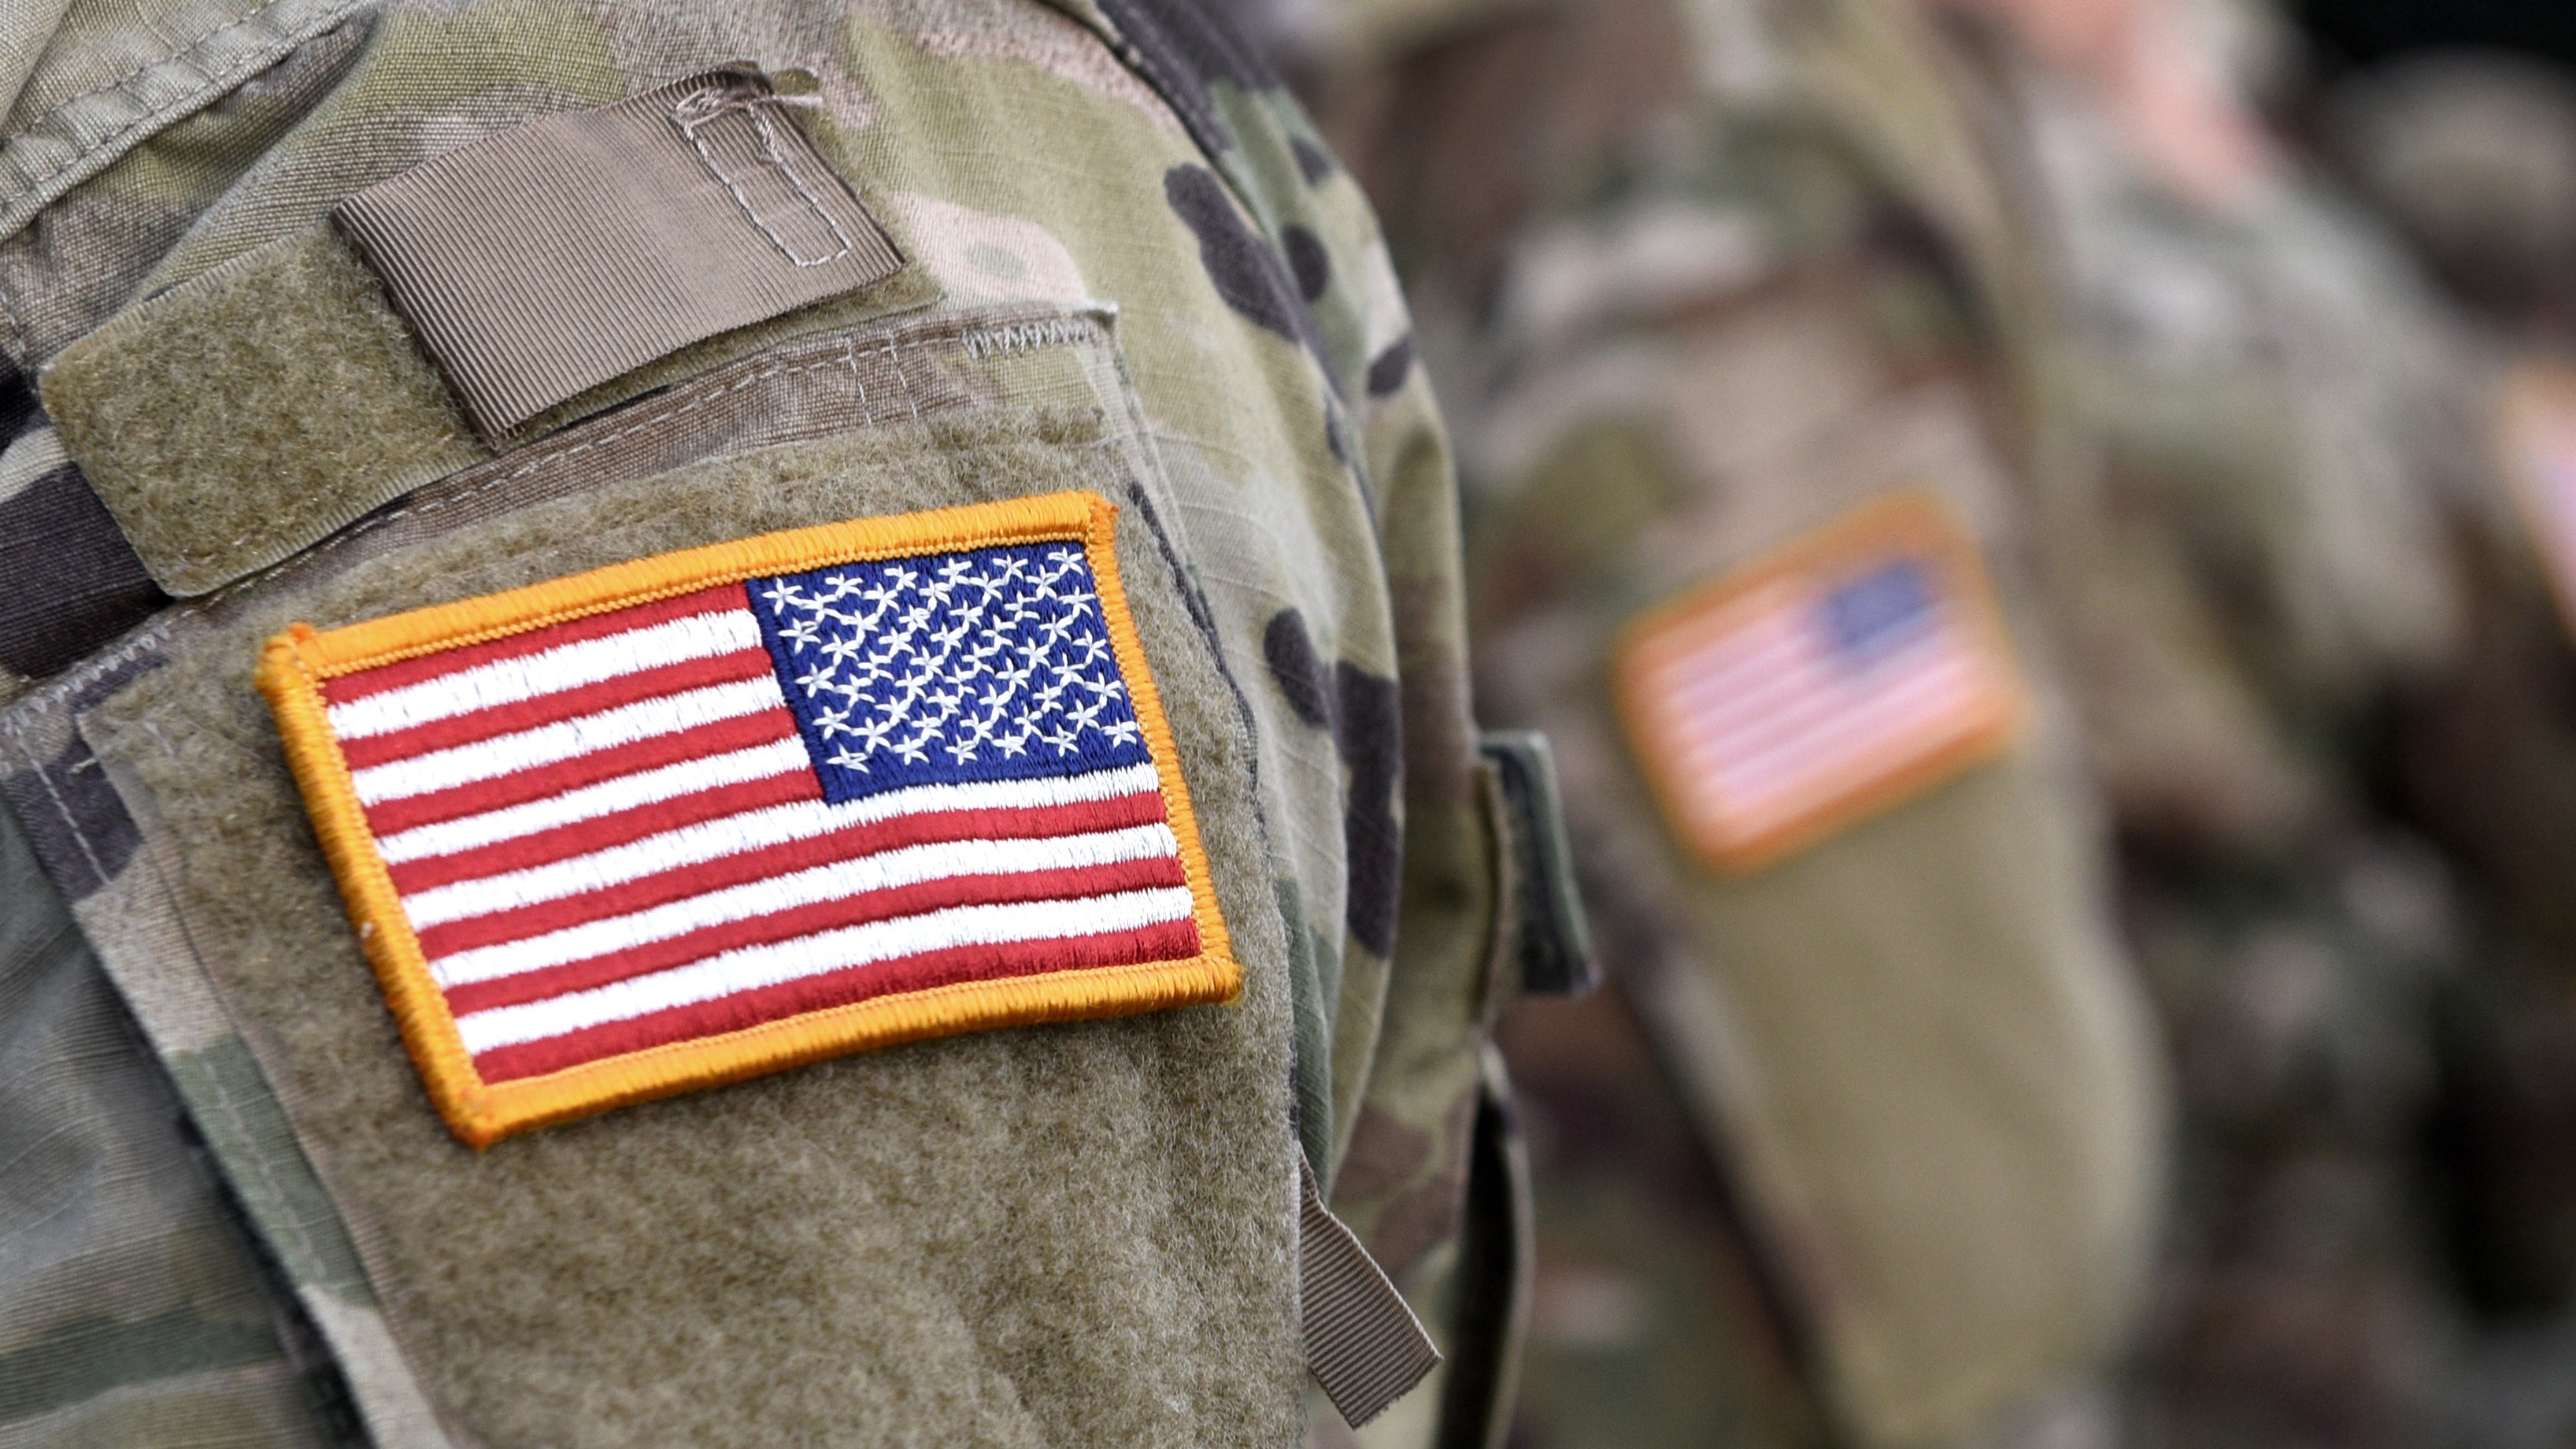 American flag patch on military uniform